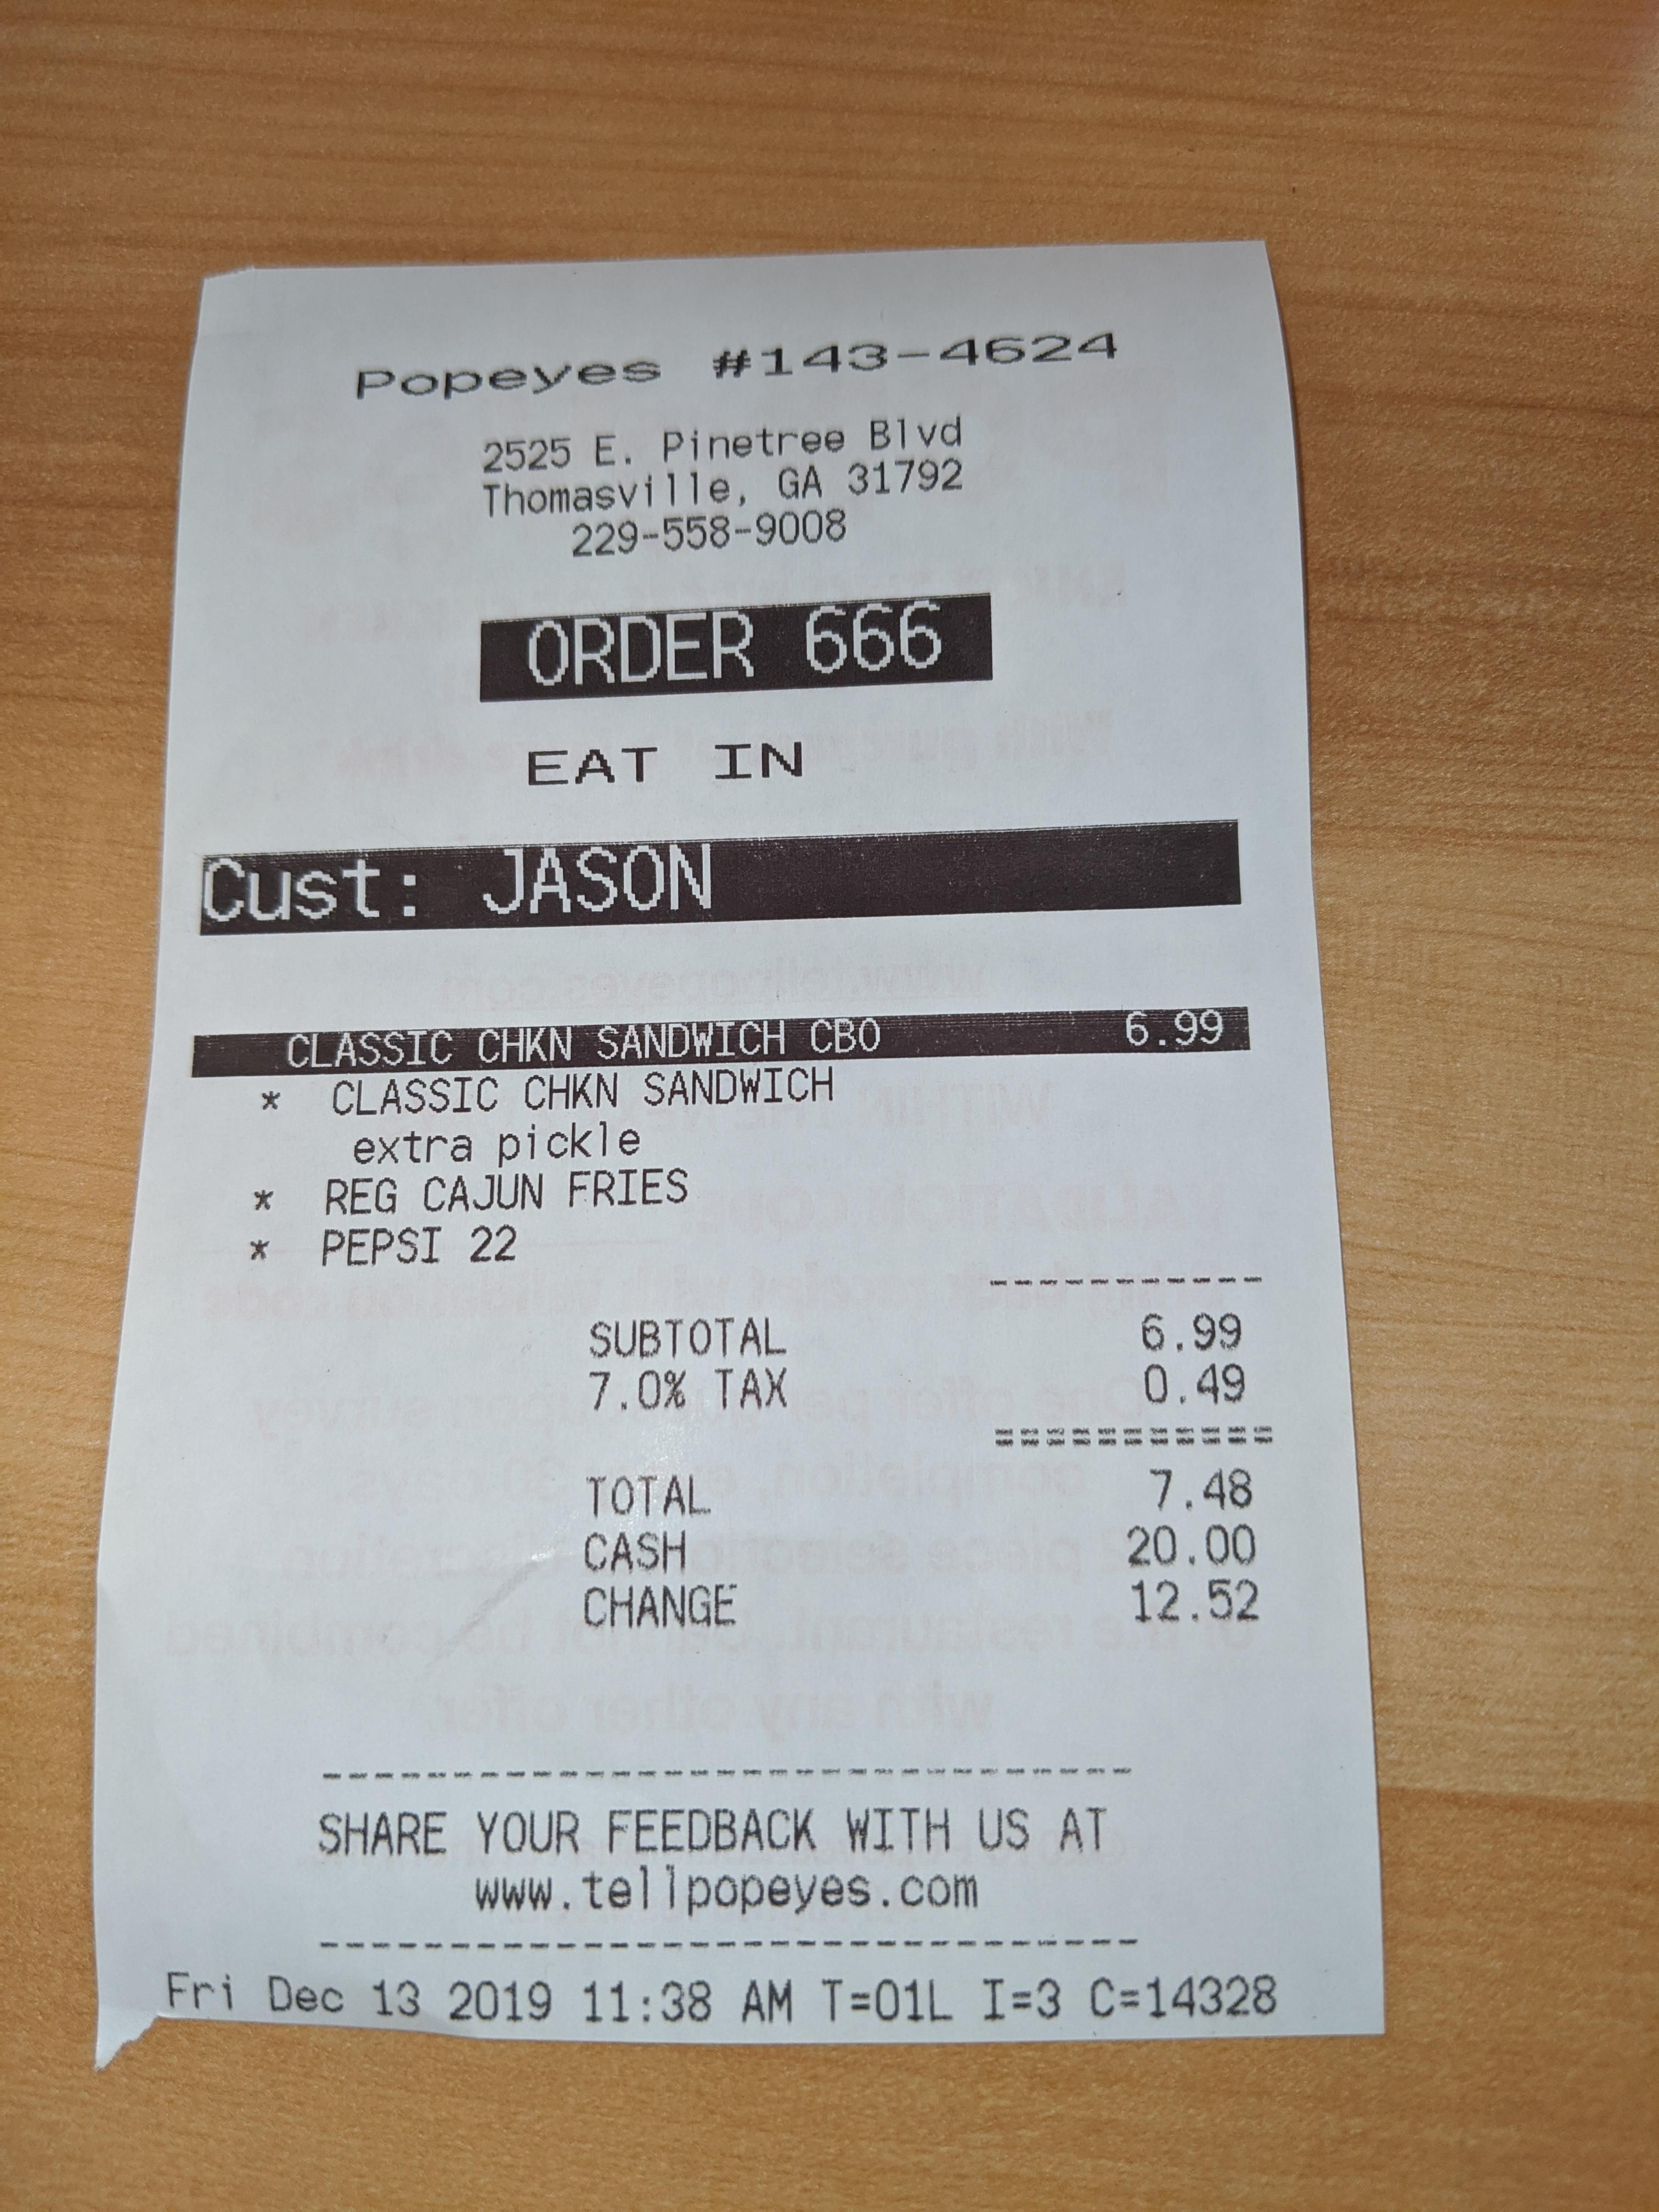 My name is Jason..it's Friday the 13th and my order number is 666. What are the odds?